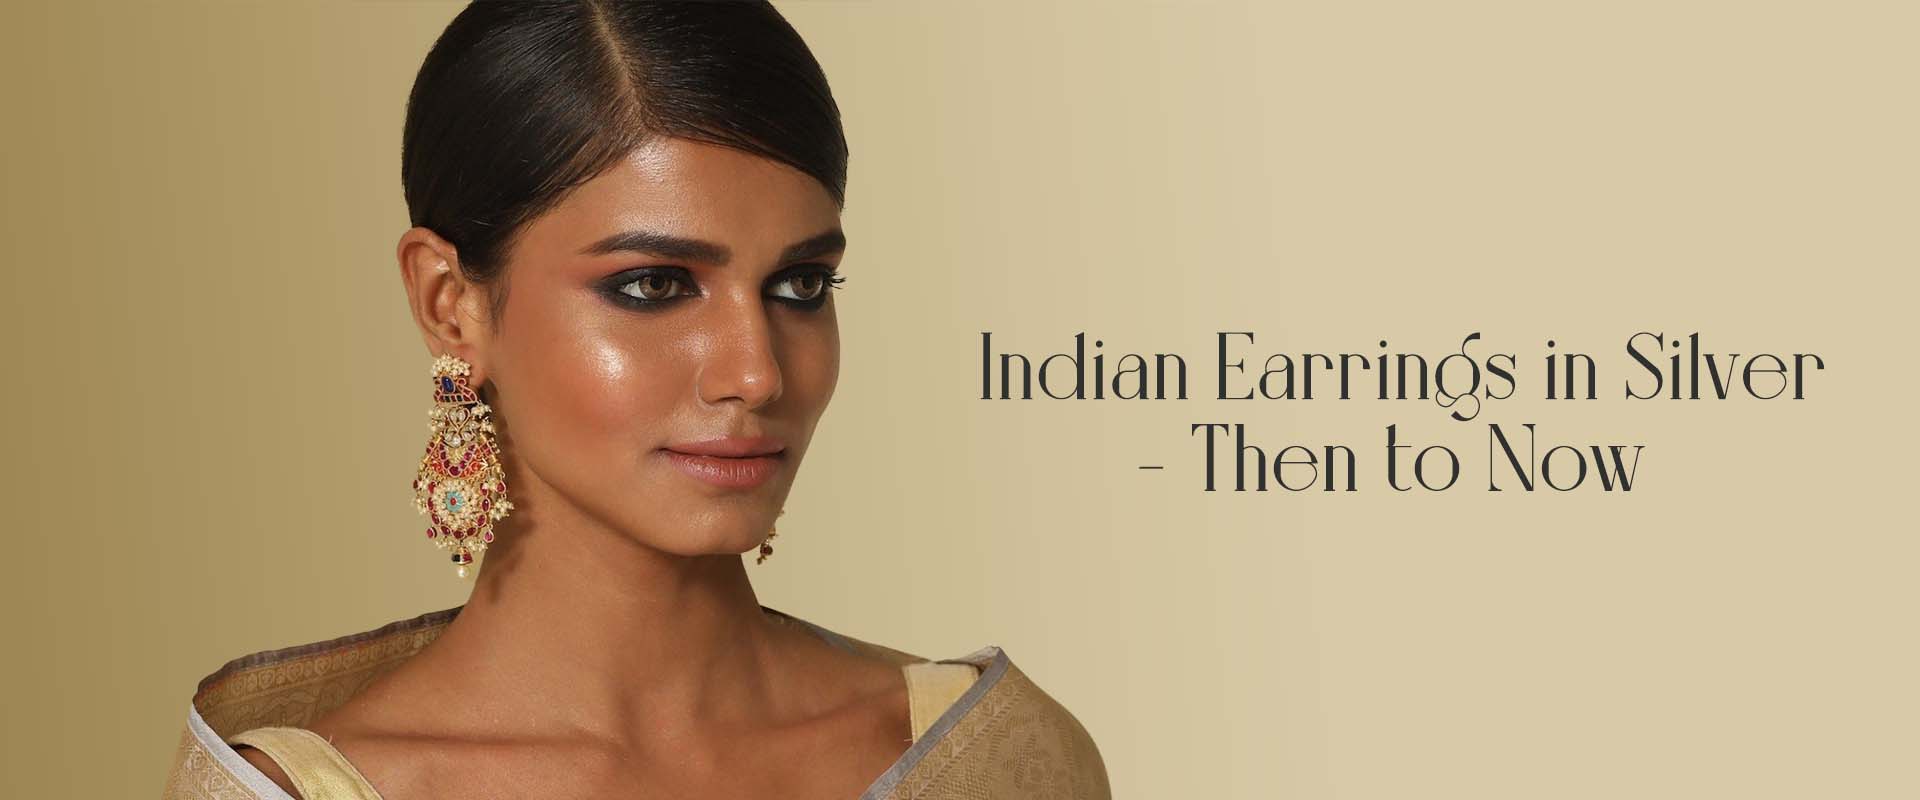 Indian Earrings in Silver - Then to Now